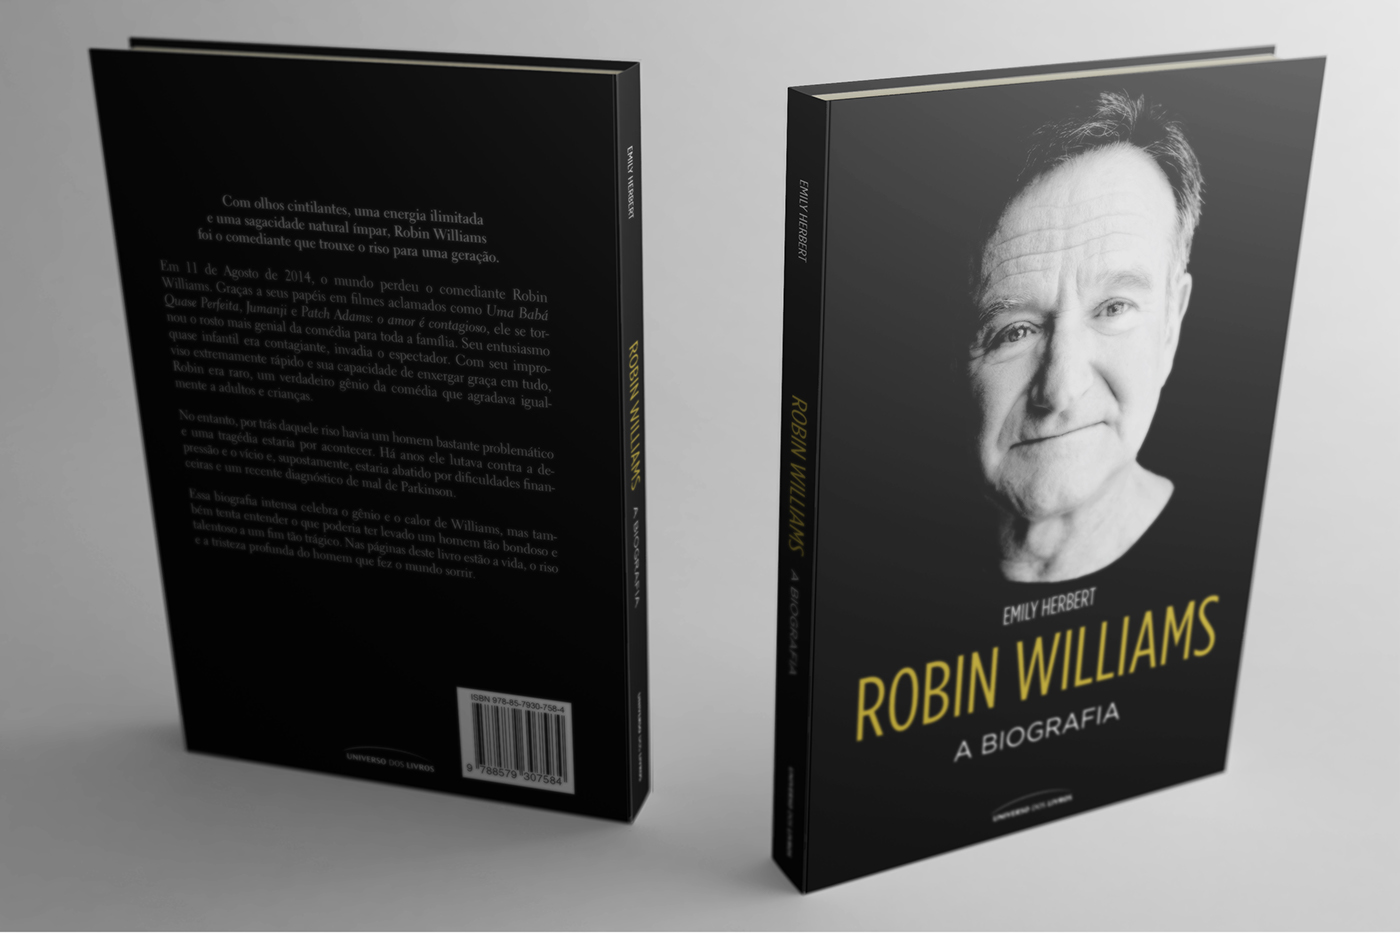 Robin williams comedian Cover Art cover book Cinema hollywood